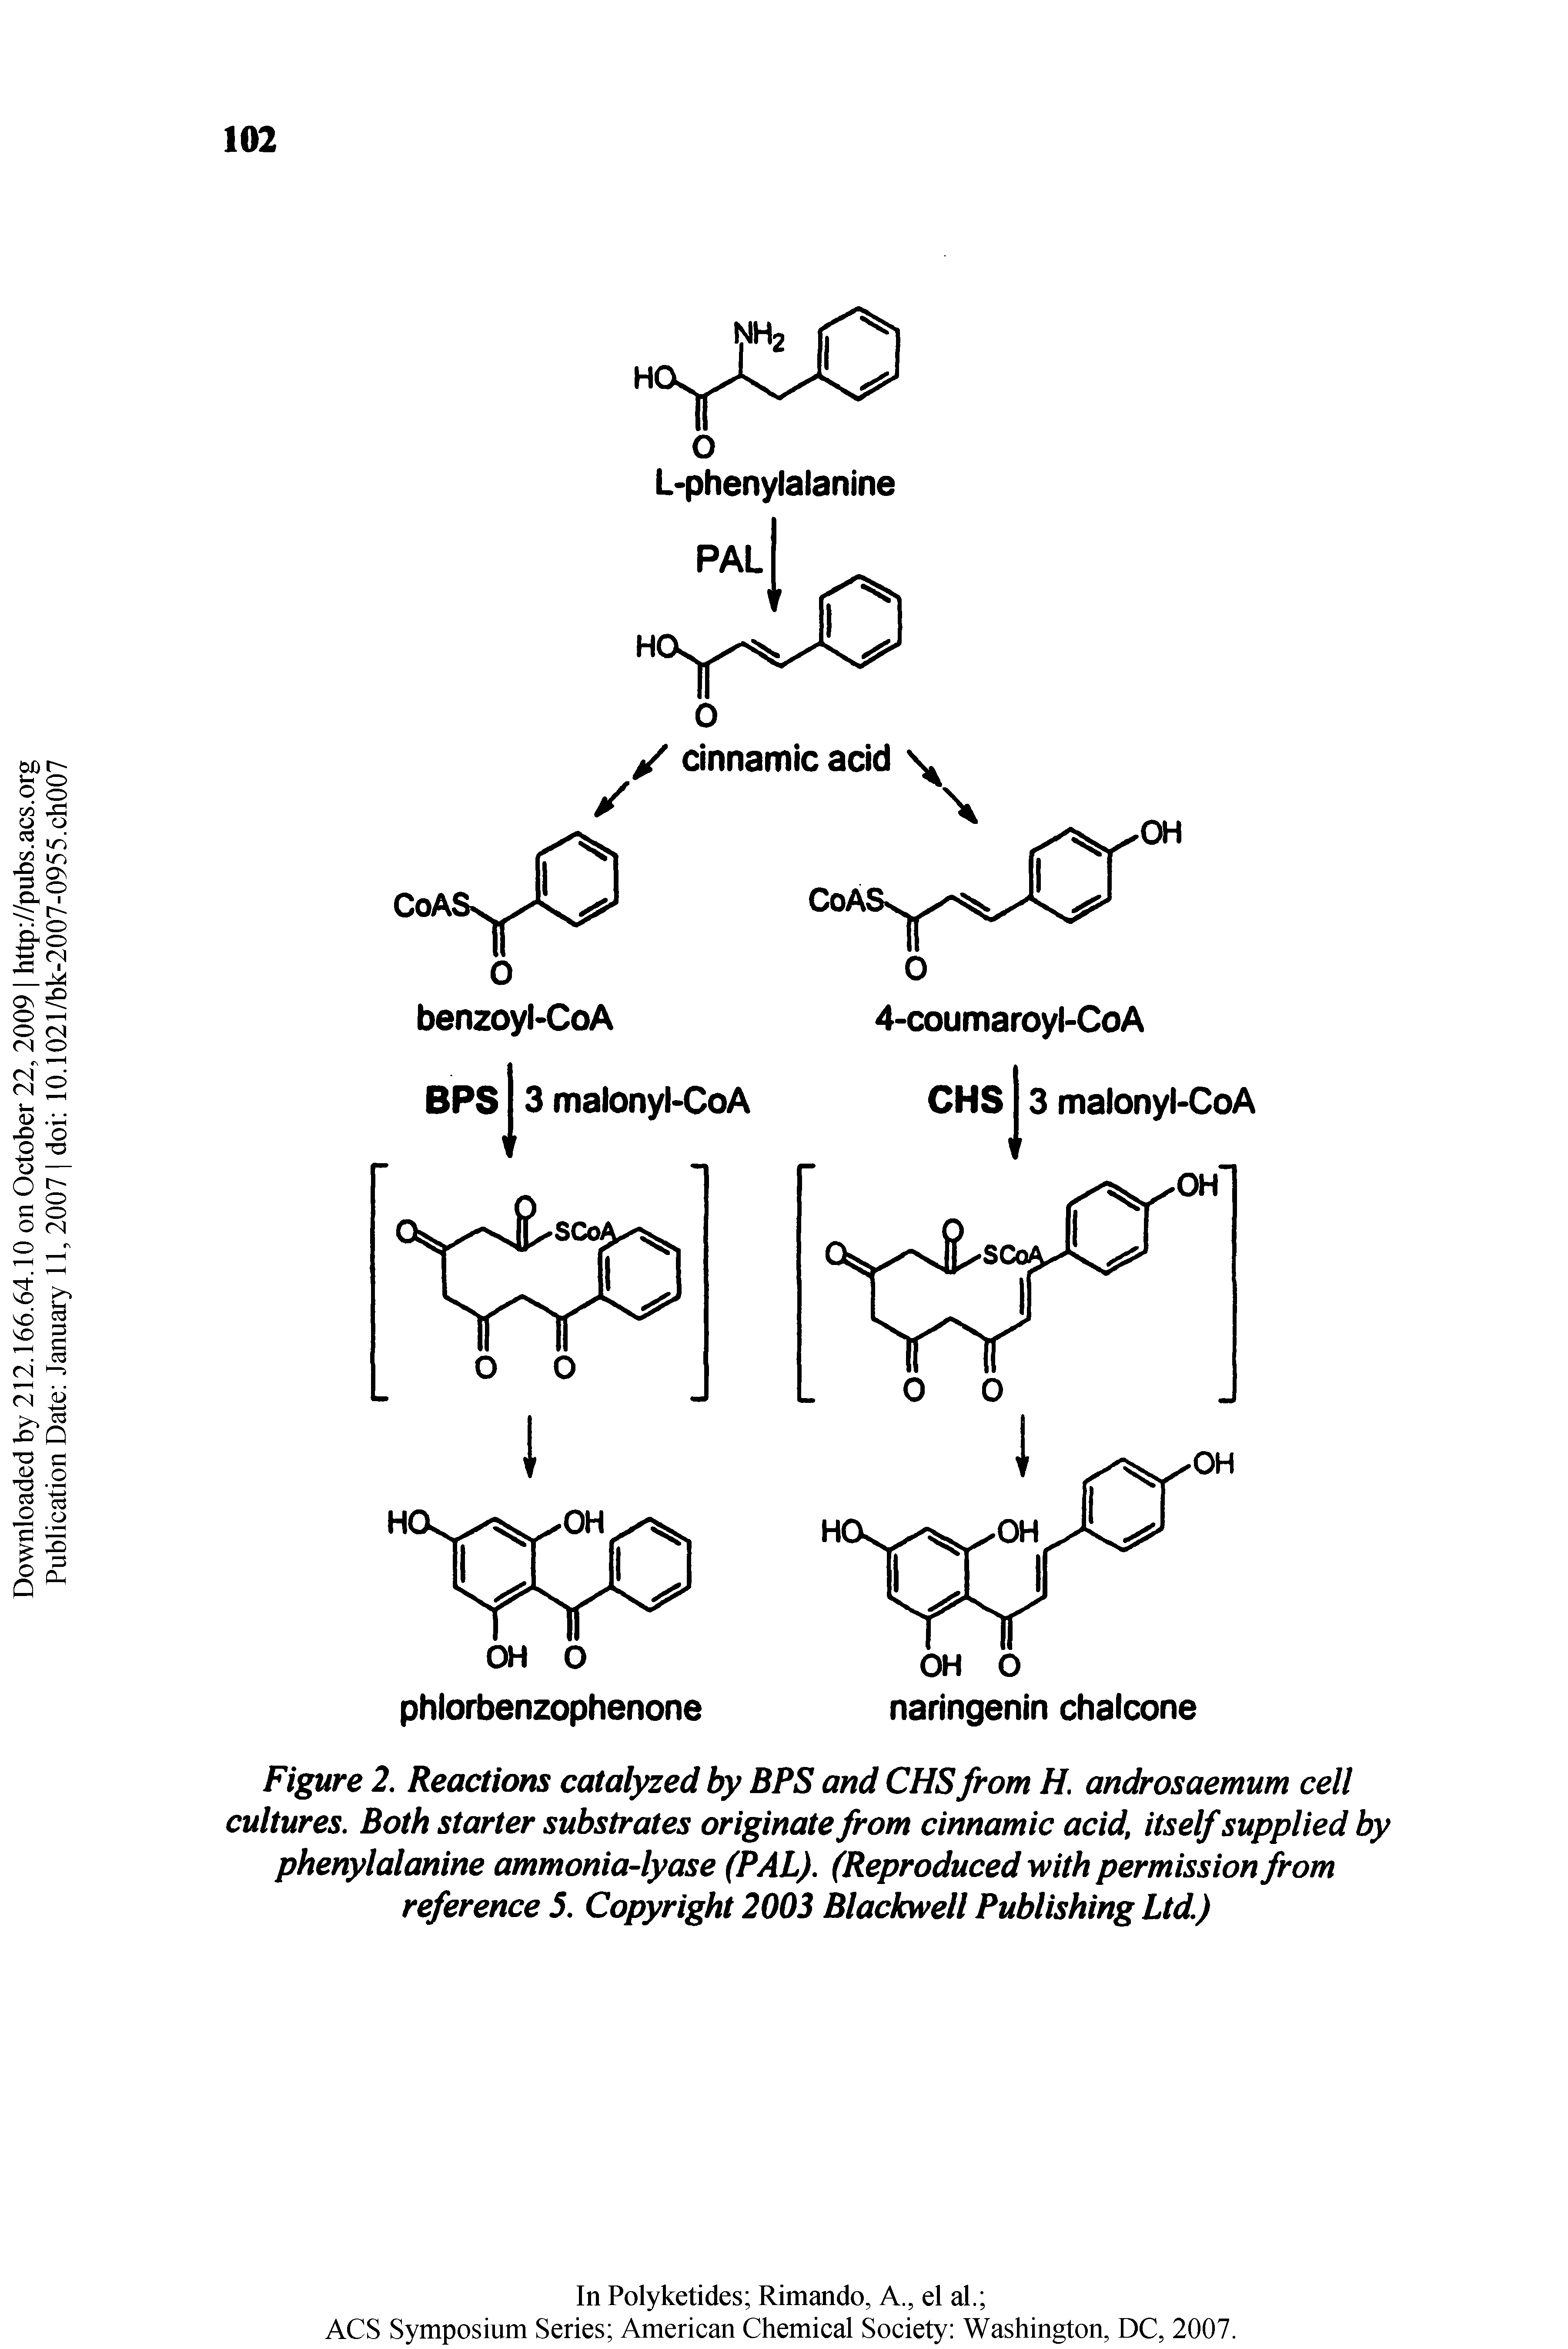 Figure 2. Reactions catalyzed by BPS and CHS from H. androsaemum cell cultures. Both starter substrates originate from cinnamic acid, itself supplied by phenylalanine ammonia-lyase (PAL). (Reproduced with permission from reference 5. Copyright 2003 Blackwell Publishing Ltd.)...